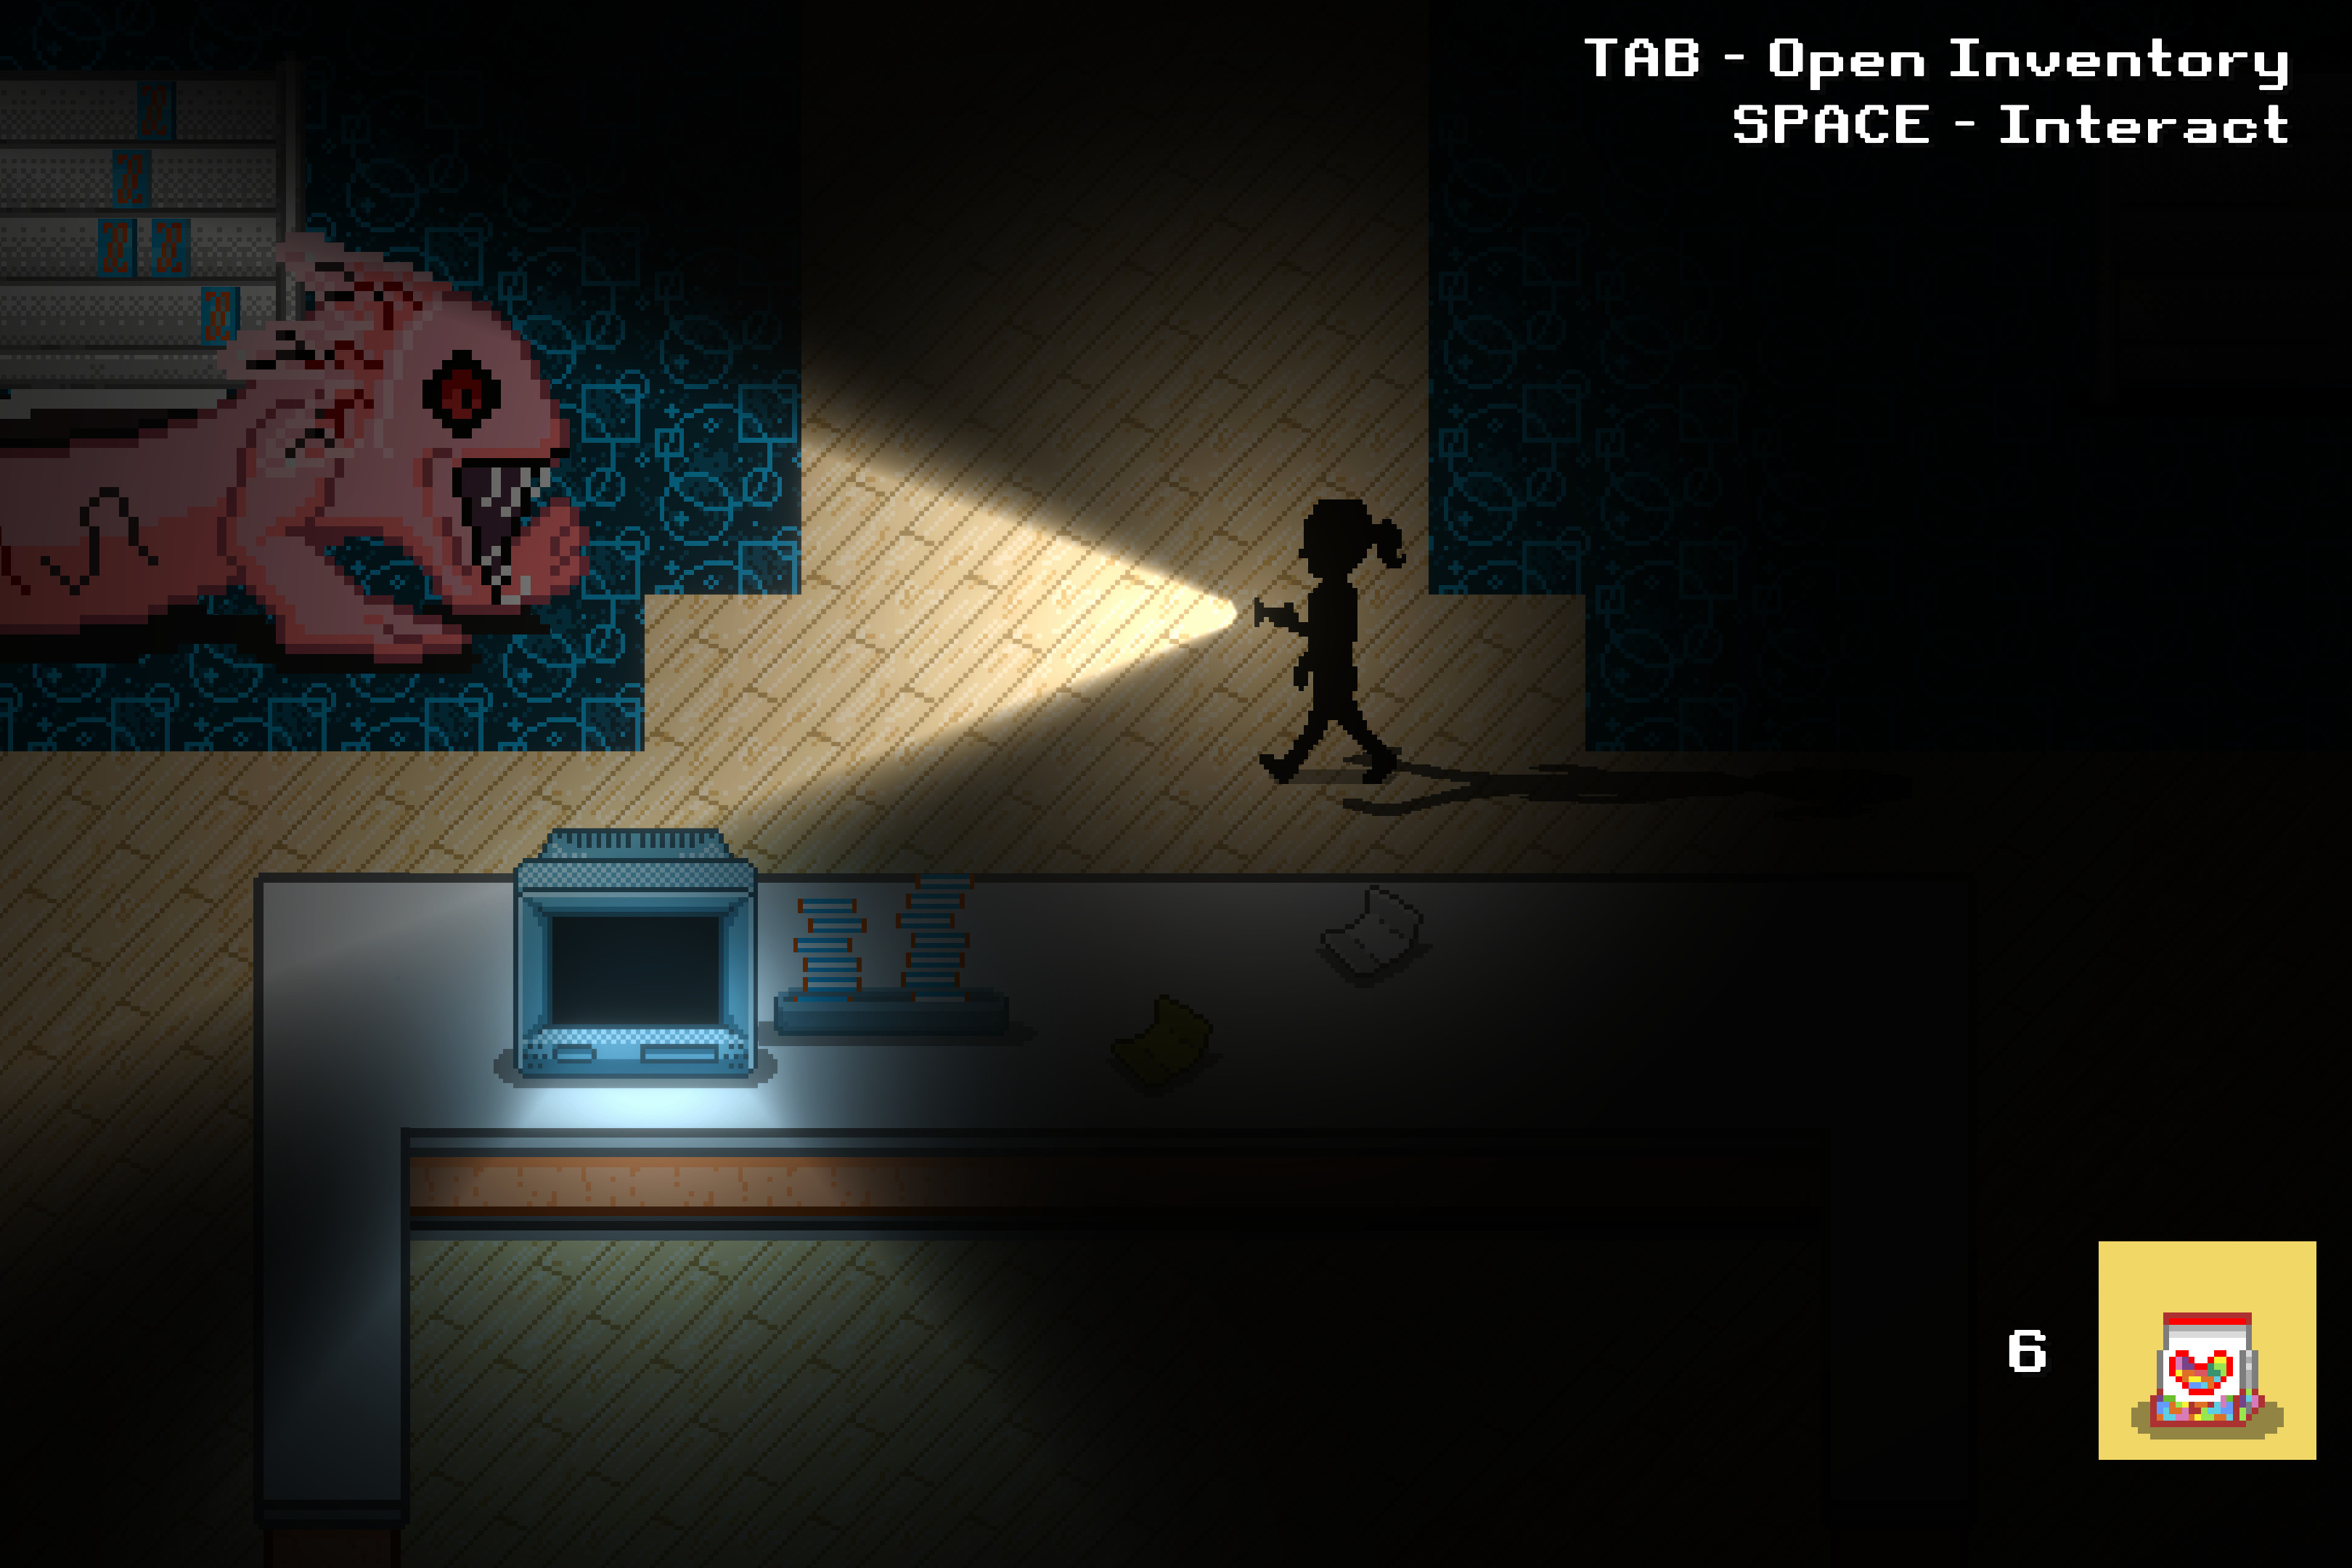 Lights off! Shot of monster and in-game lighting system.